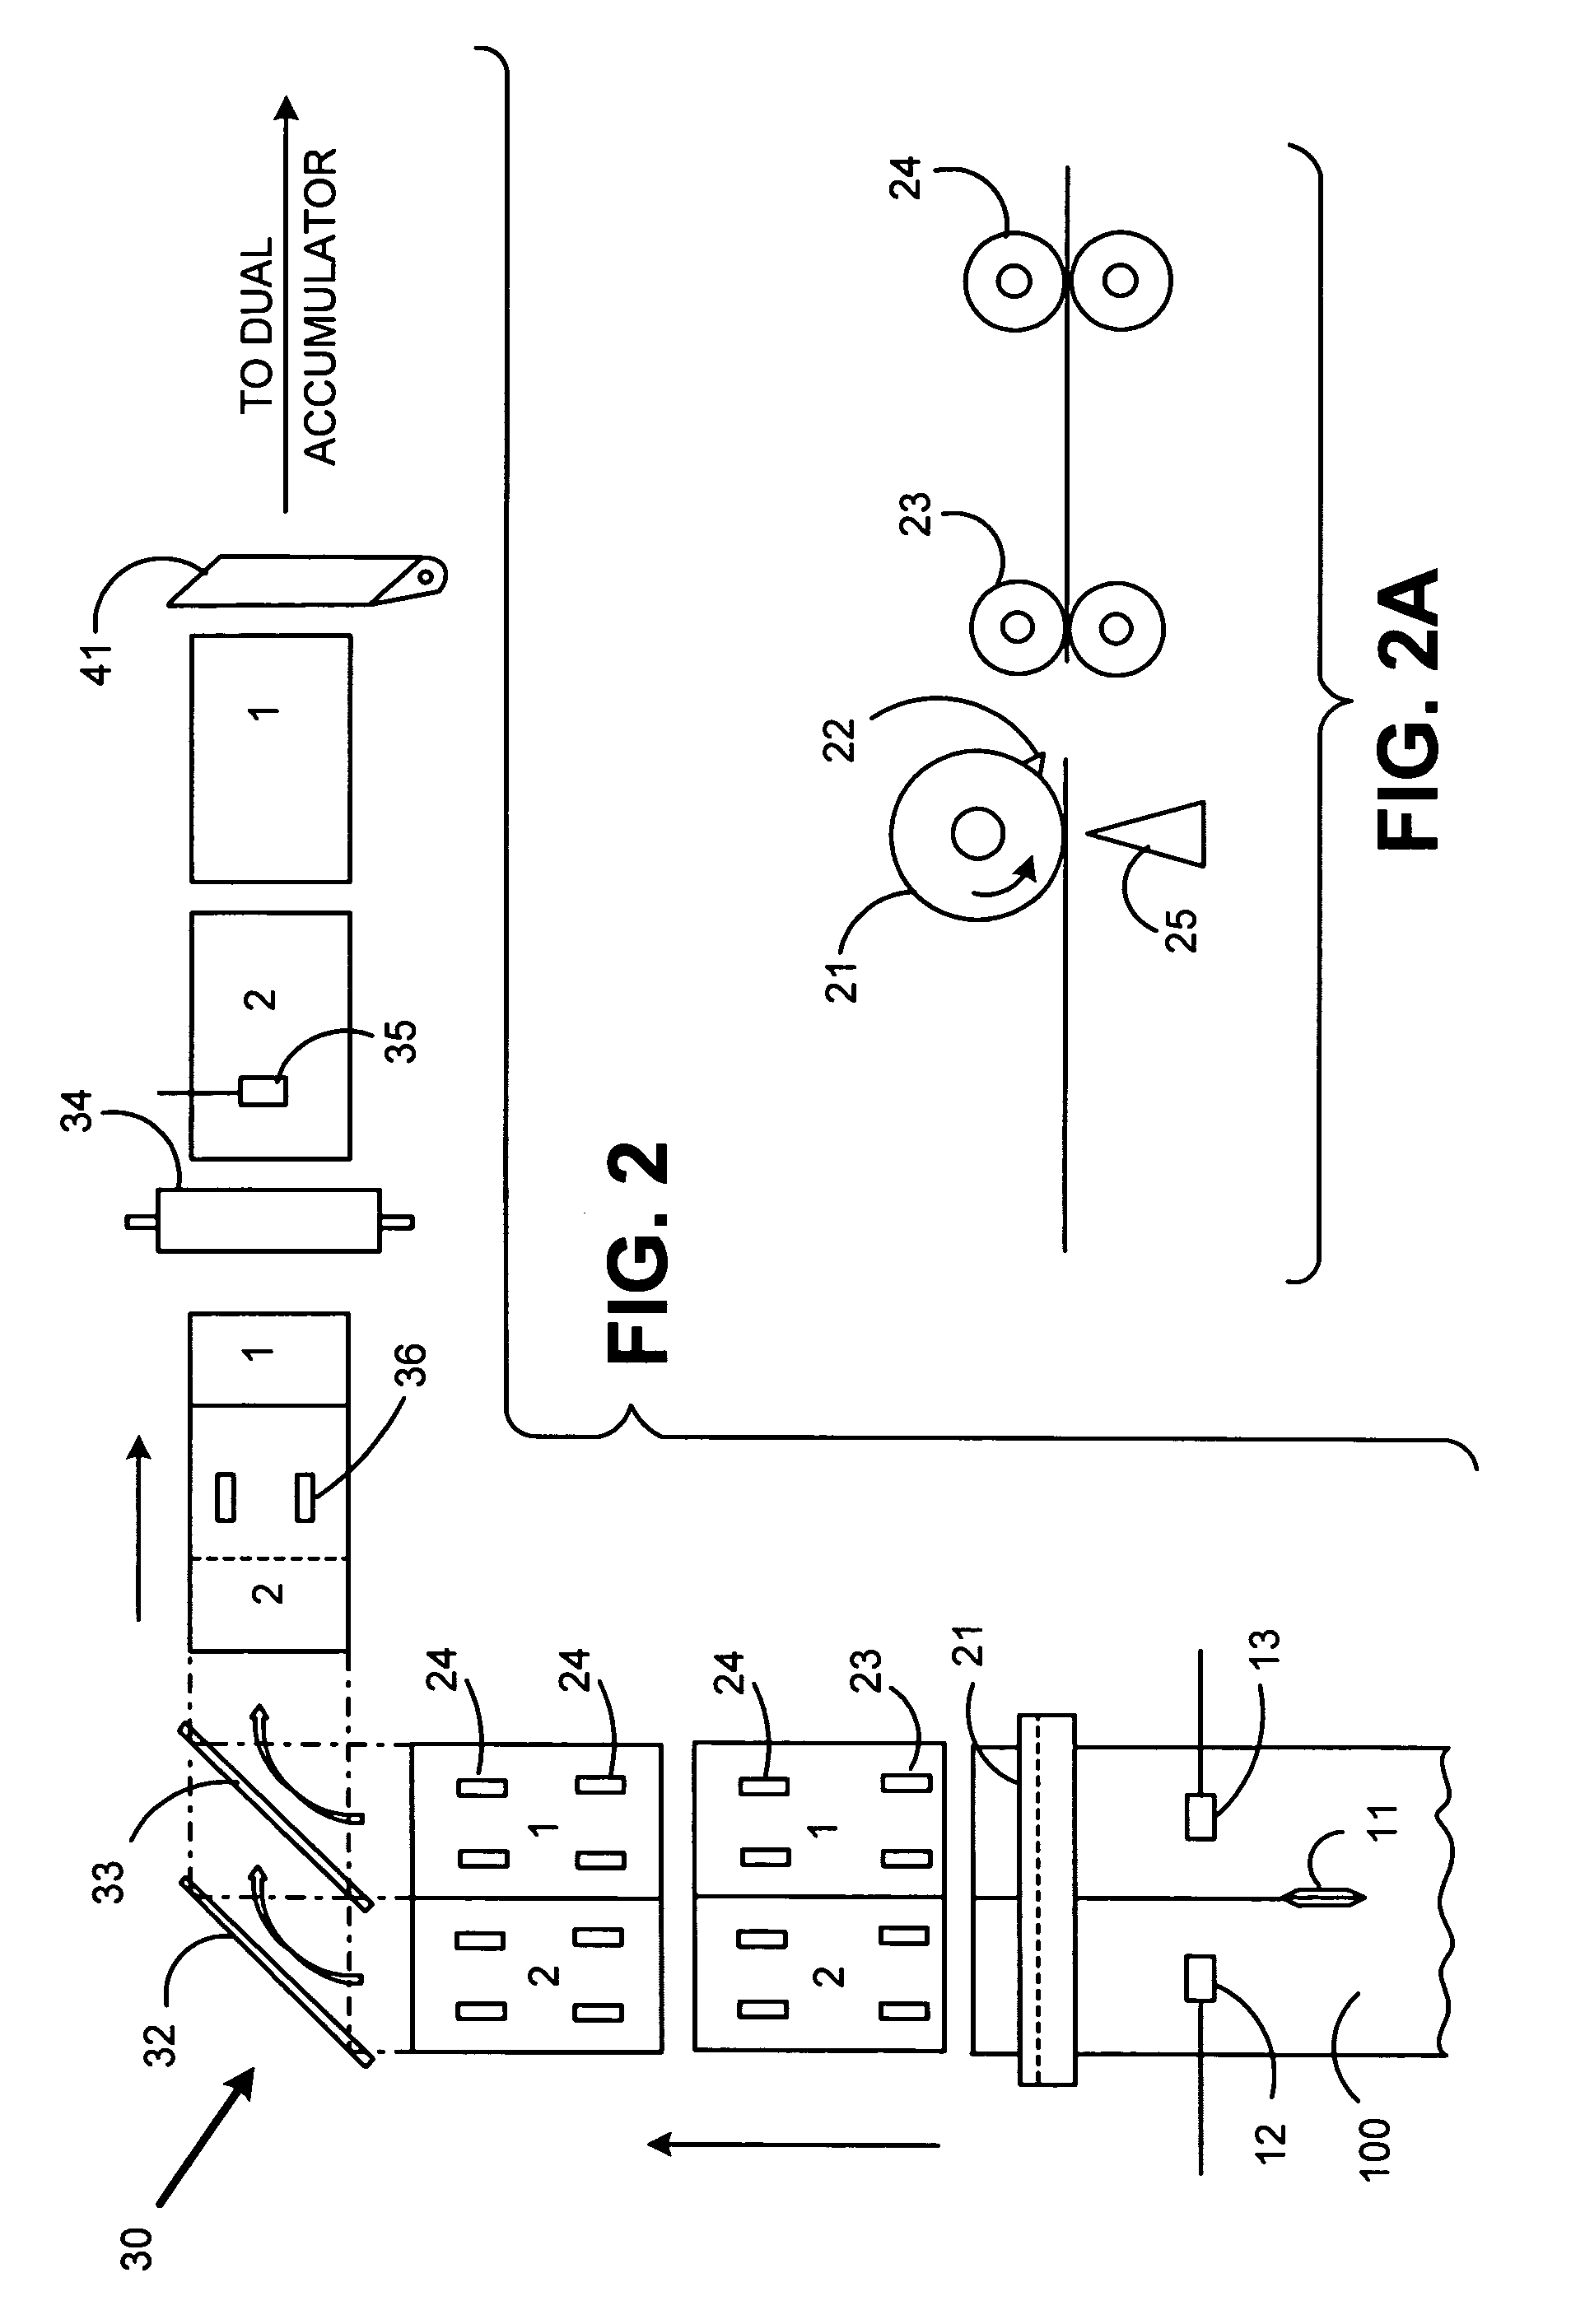 System and method for providing sheets to an inserter system using a rotary cutter